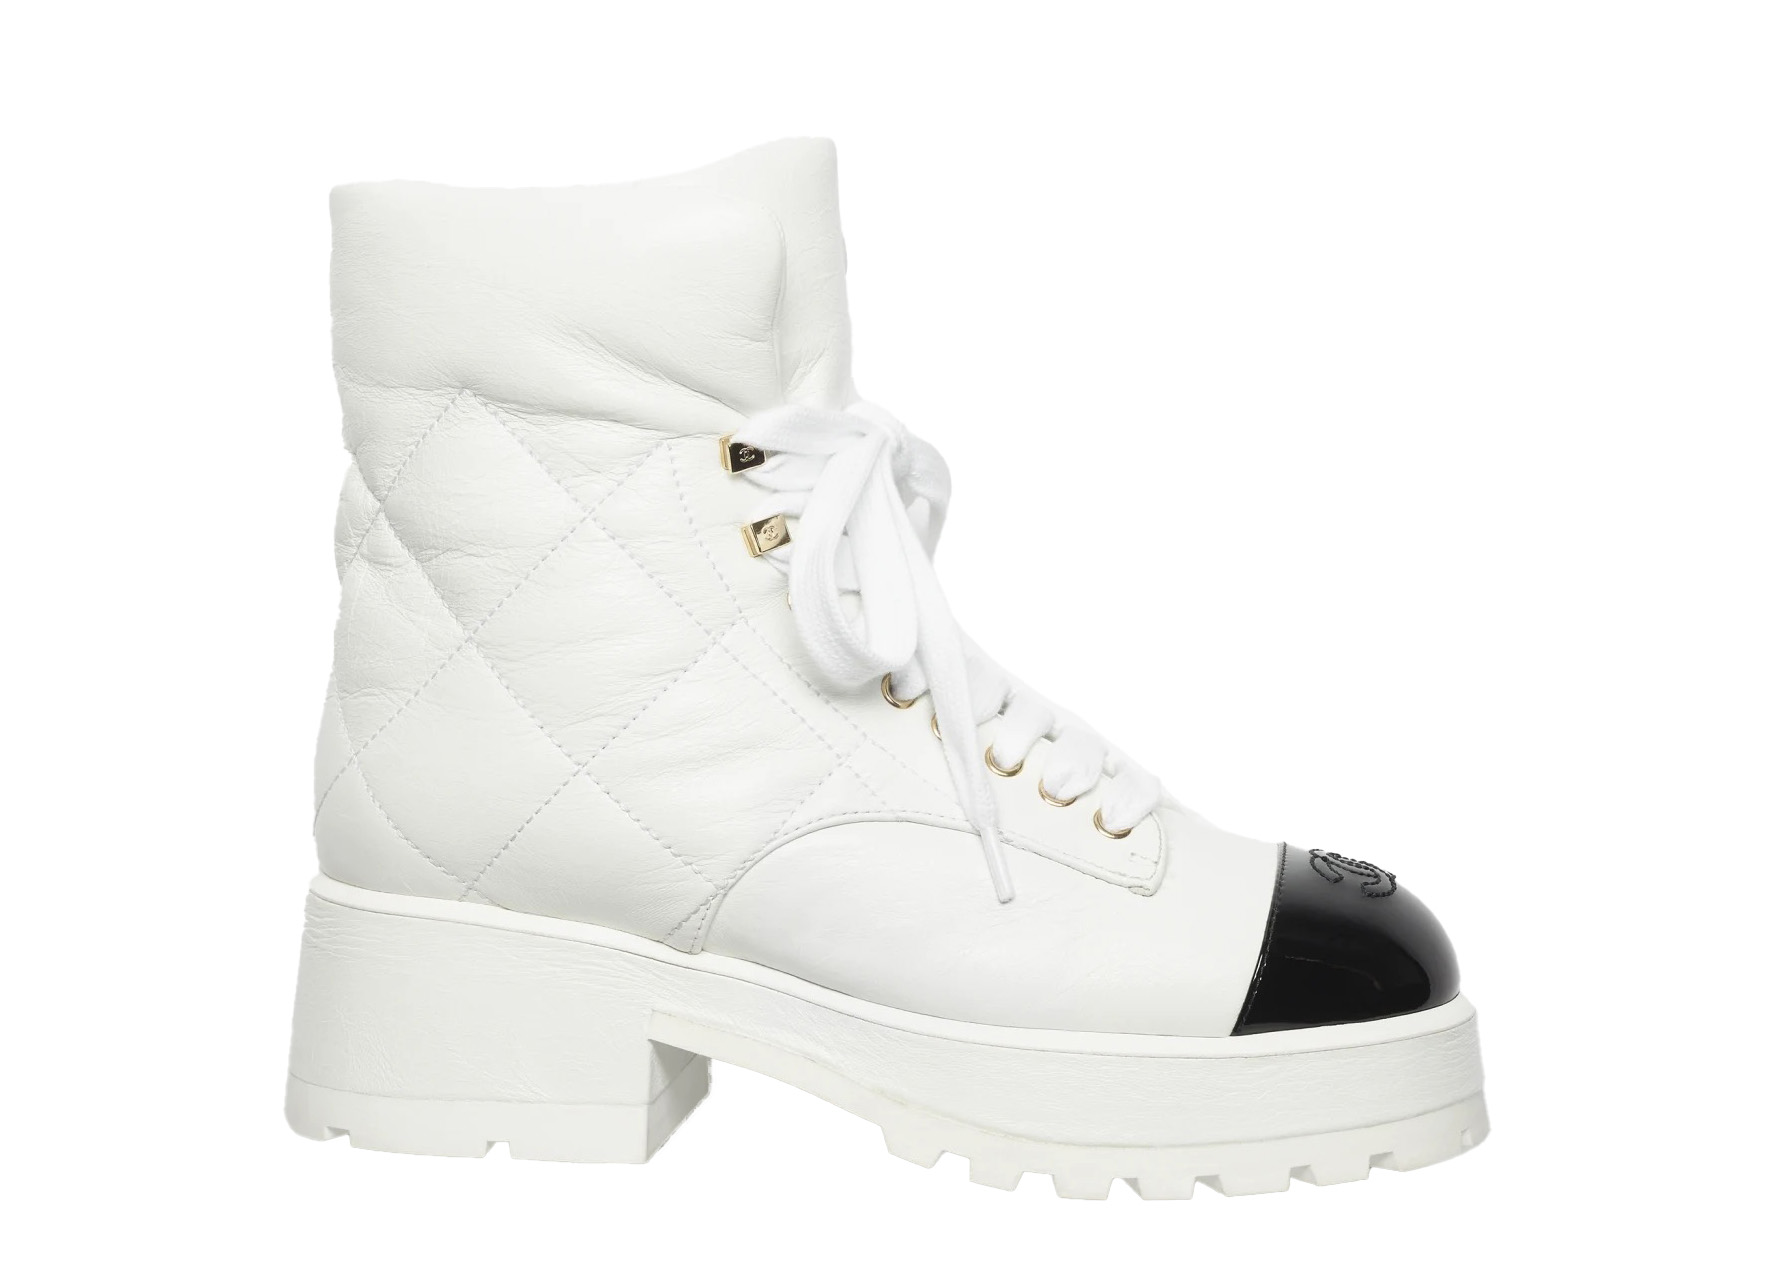 CHANEL White Boots for Women for sale  eBay